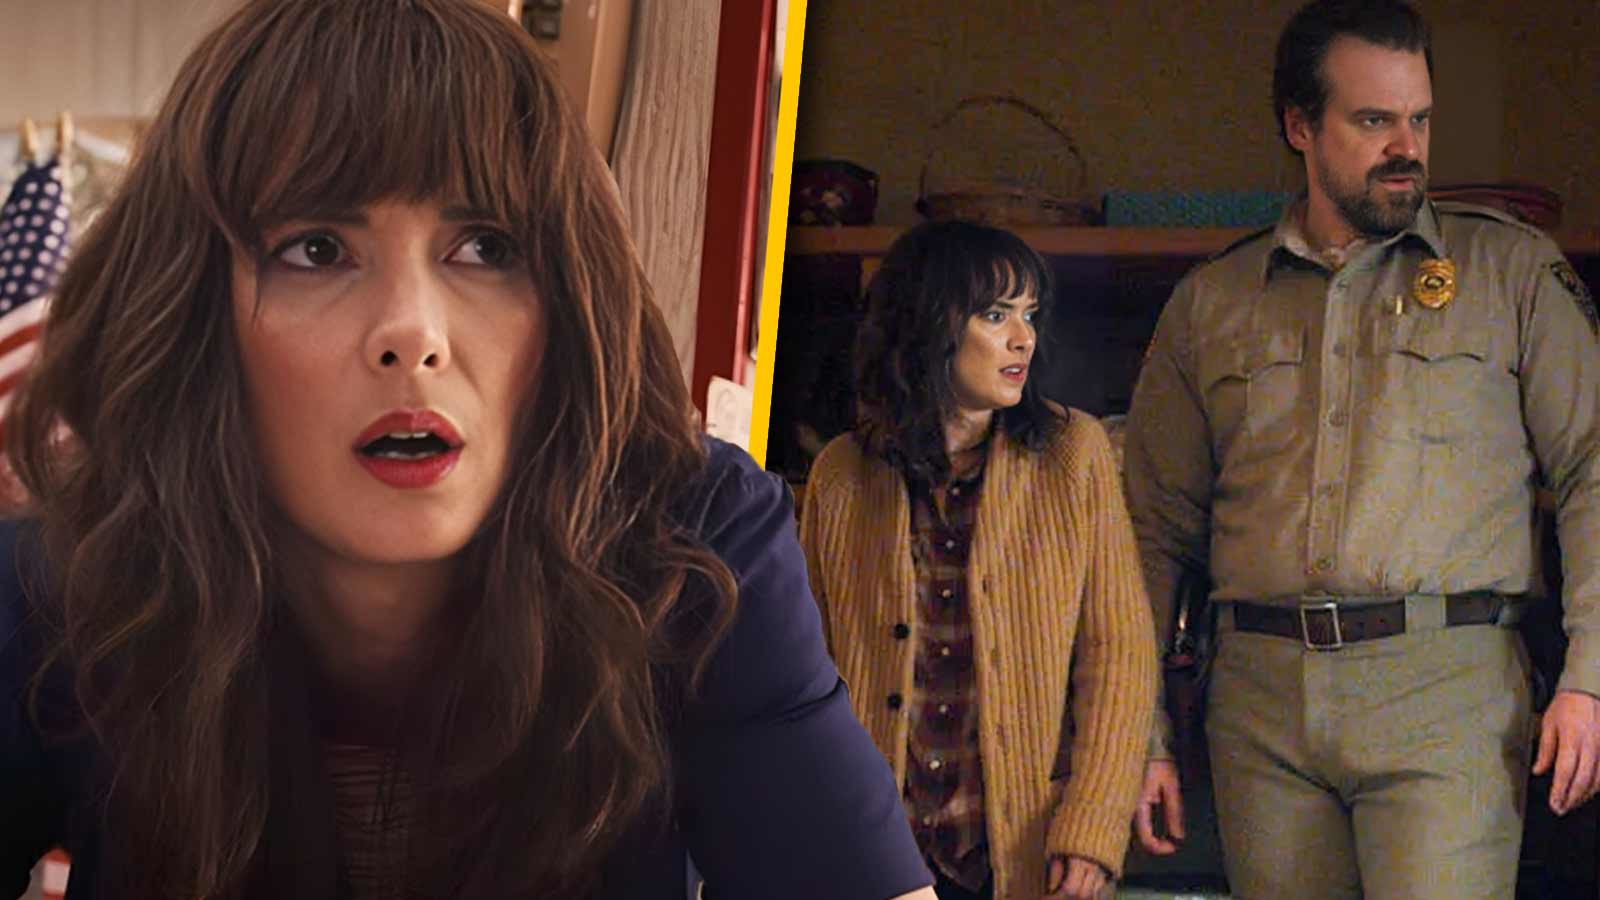 “That was my one condition”: Stranger Things Star Winona Ryder Wanted Showrunners to Grant Her One Wish Before Joining the Show But They Never Had to Fulfil It